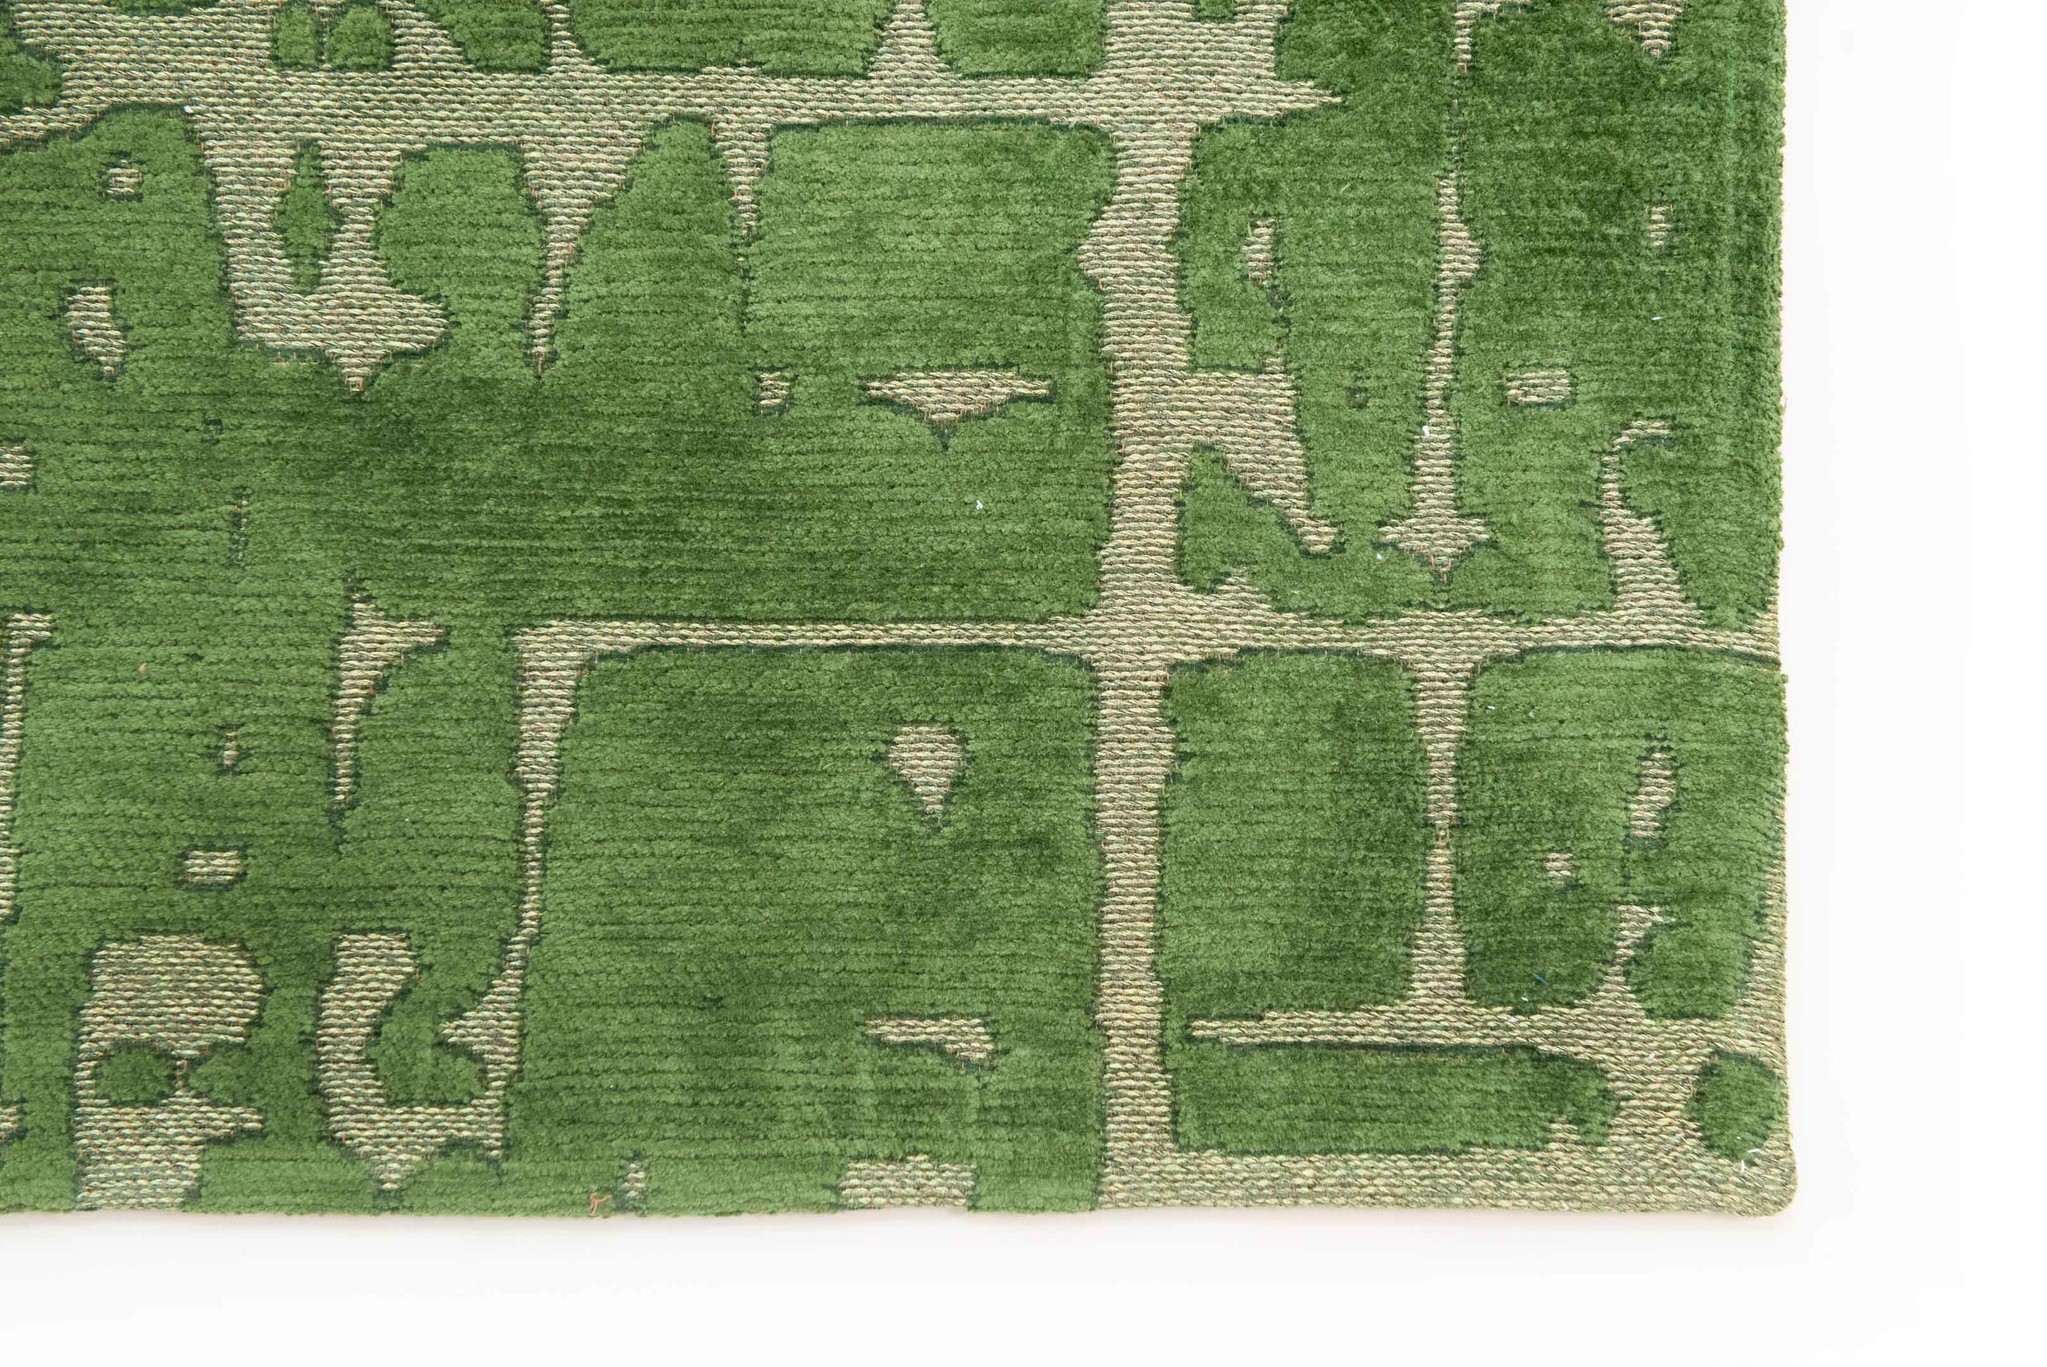 Abstract Green Belgian Rug ☞ Size: 2' 7" x 8' 2" (80 x 250 cm)